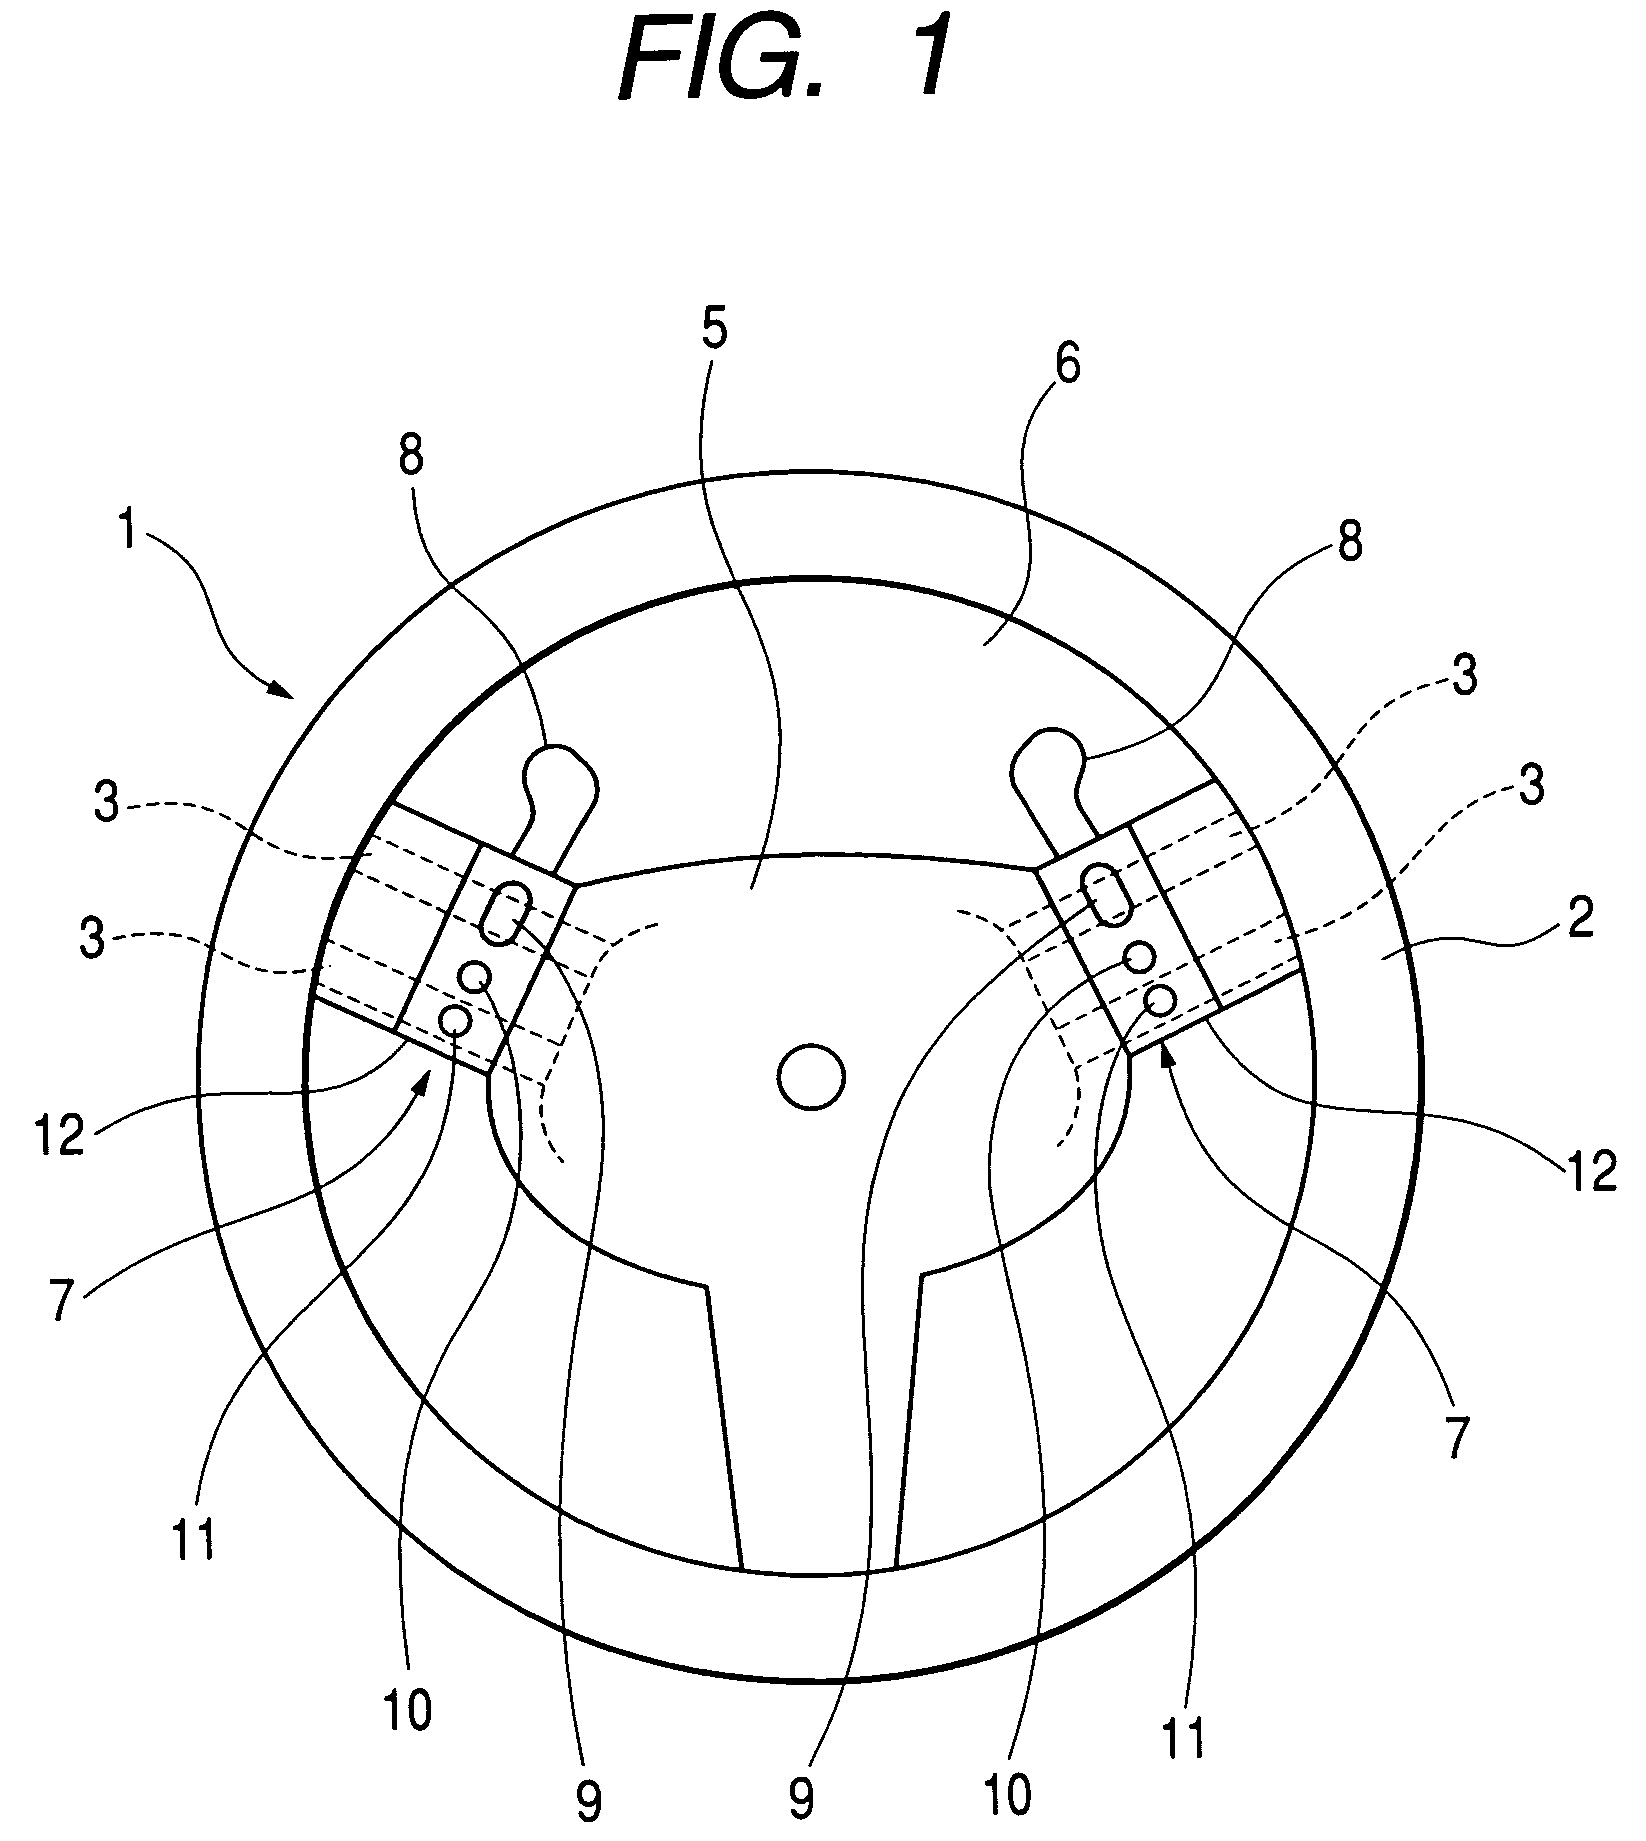 Steering switch for vehicle